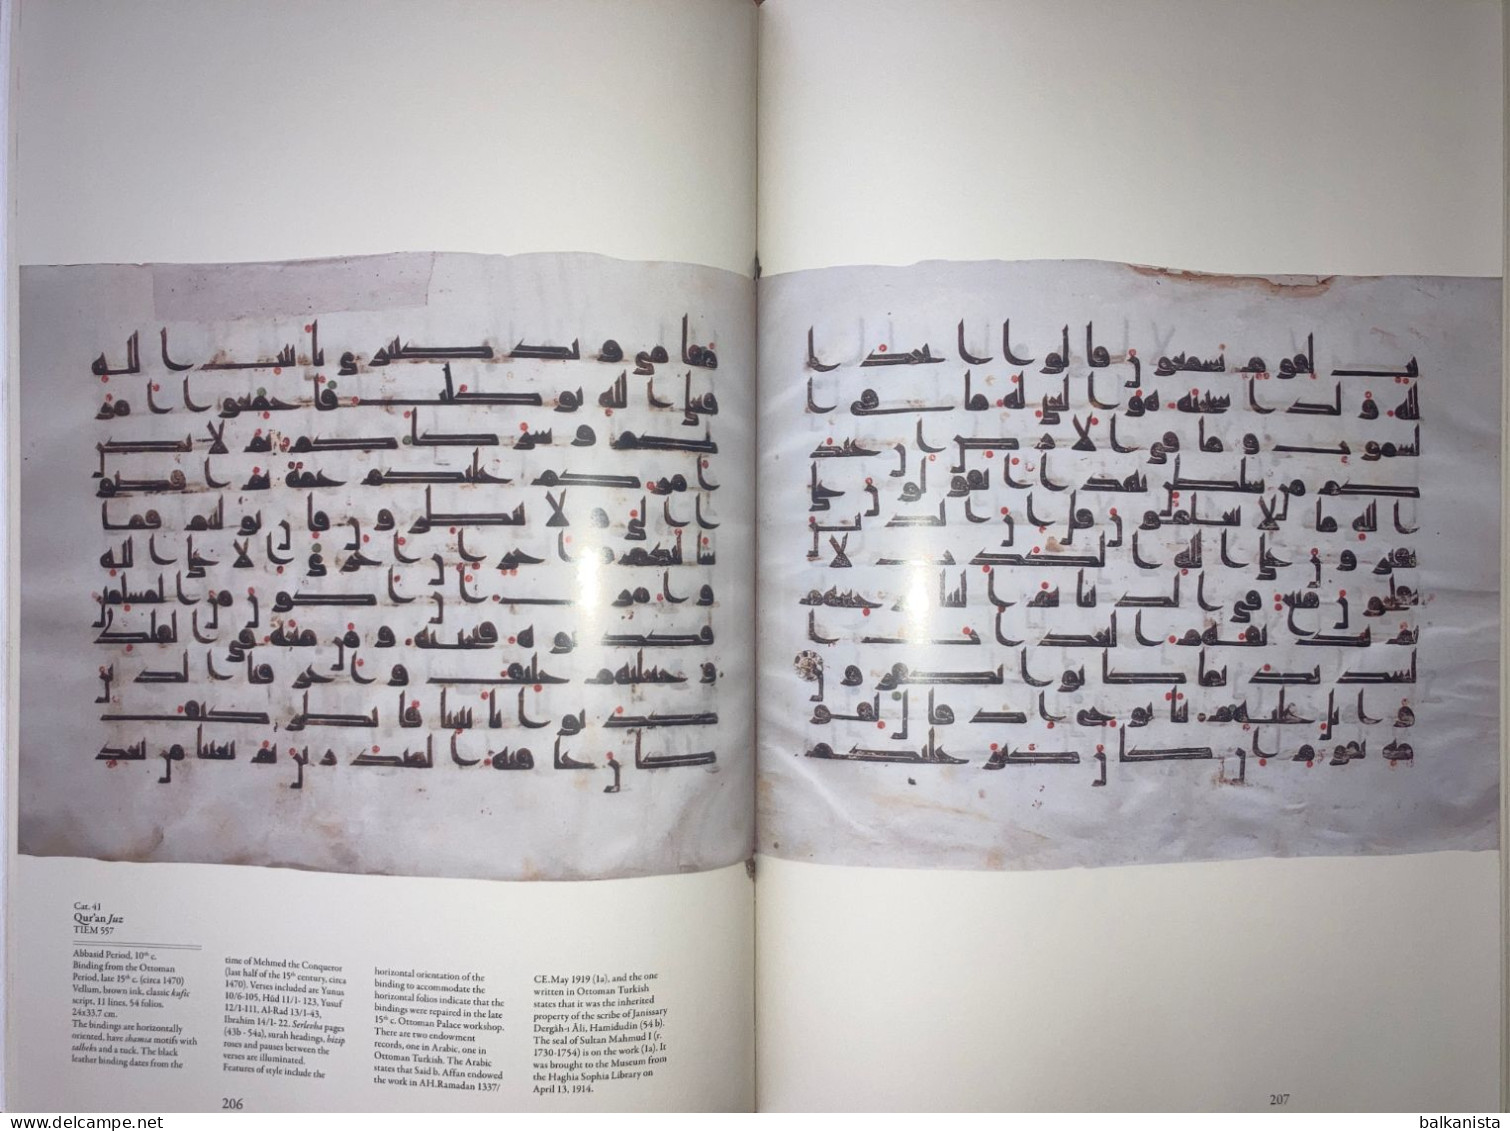 The 1400th Anniversary of the Qur'an  Museum of Turkish and Islamic Art Qur'an Collection.